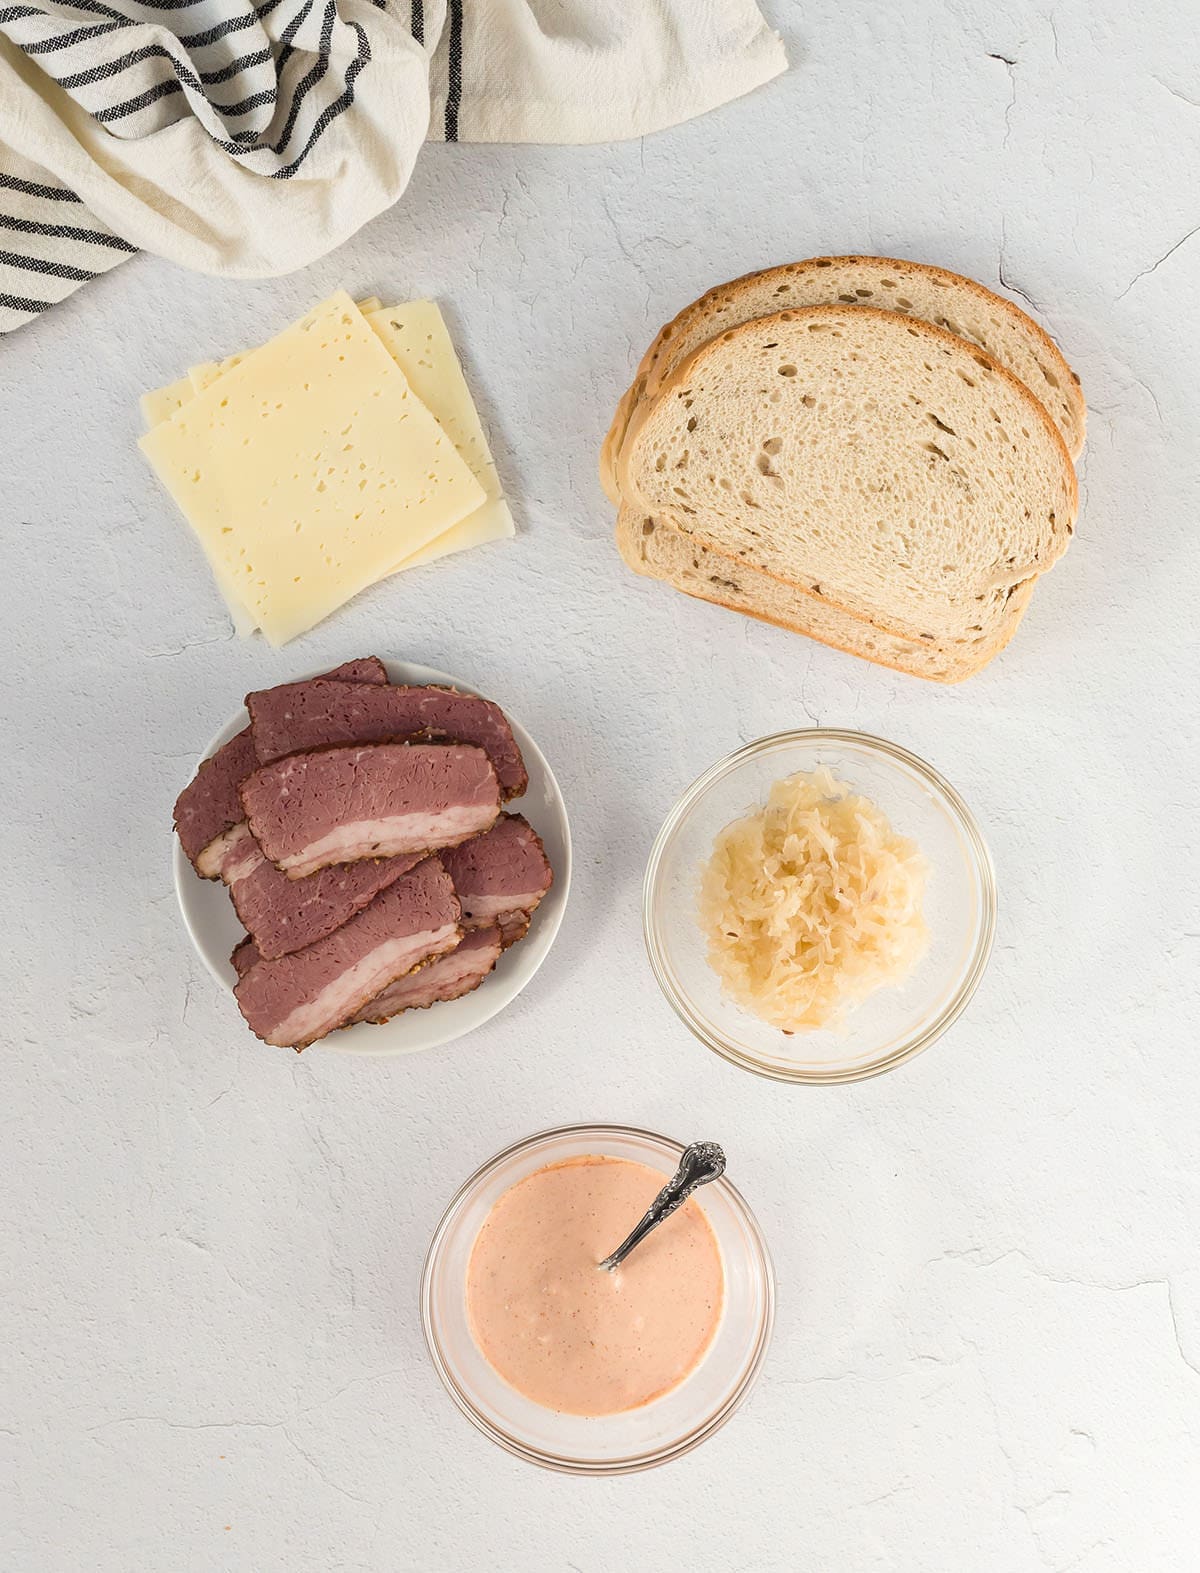 Russian dressing in a clear bowl alongside bread, cheese and cold cuts.